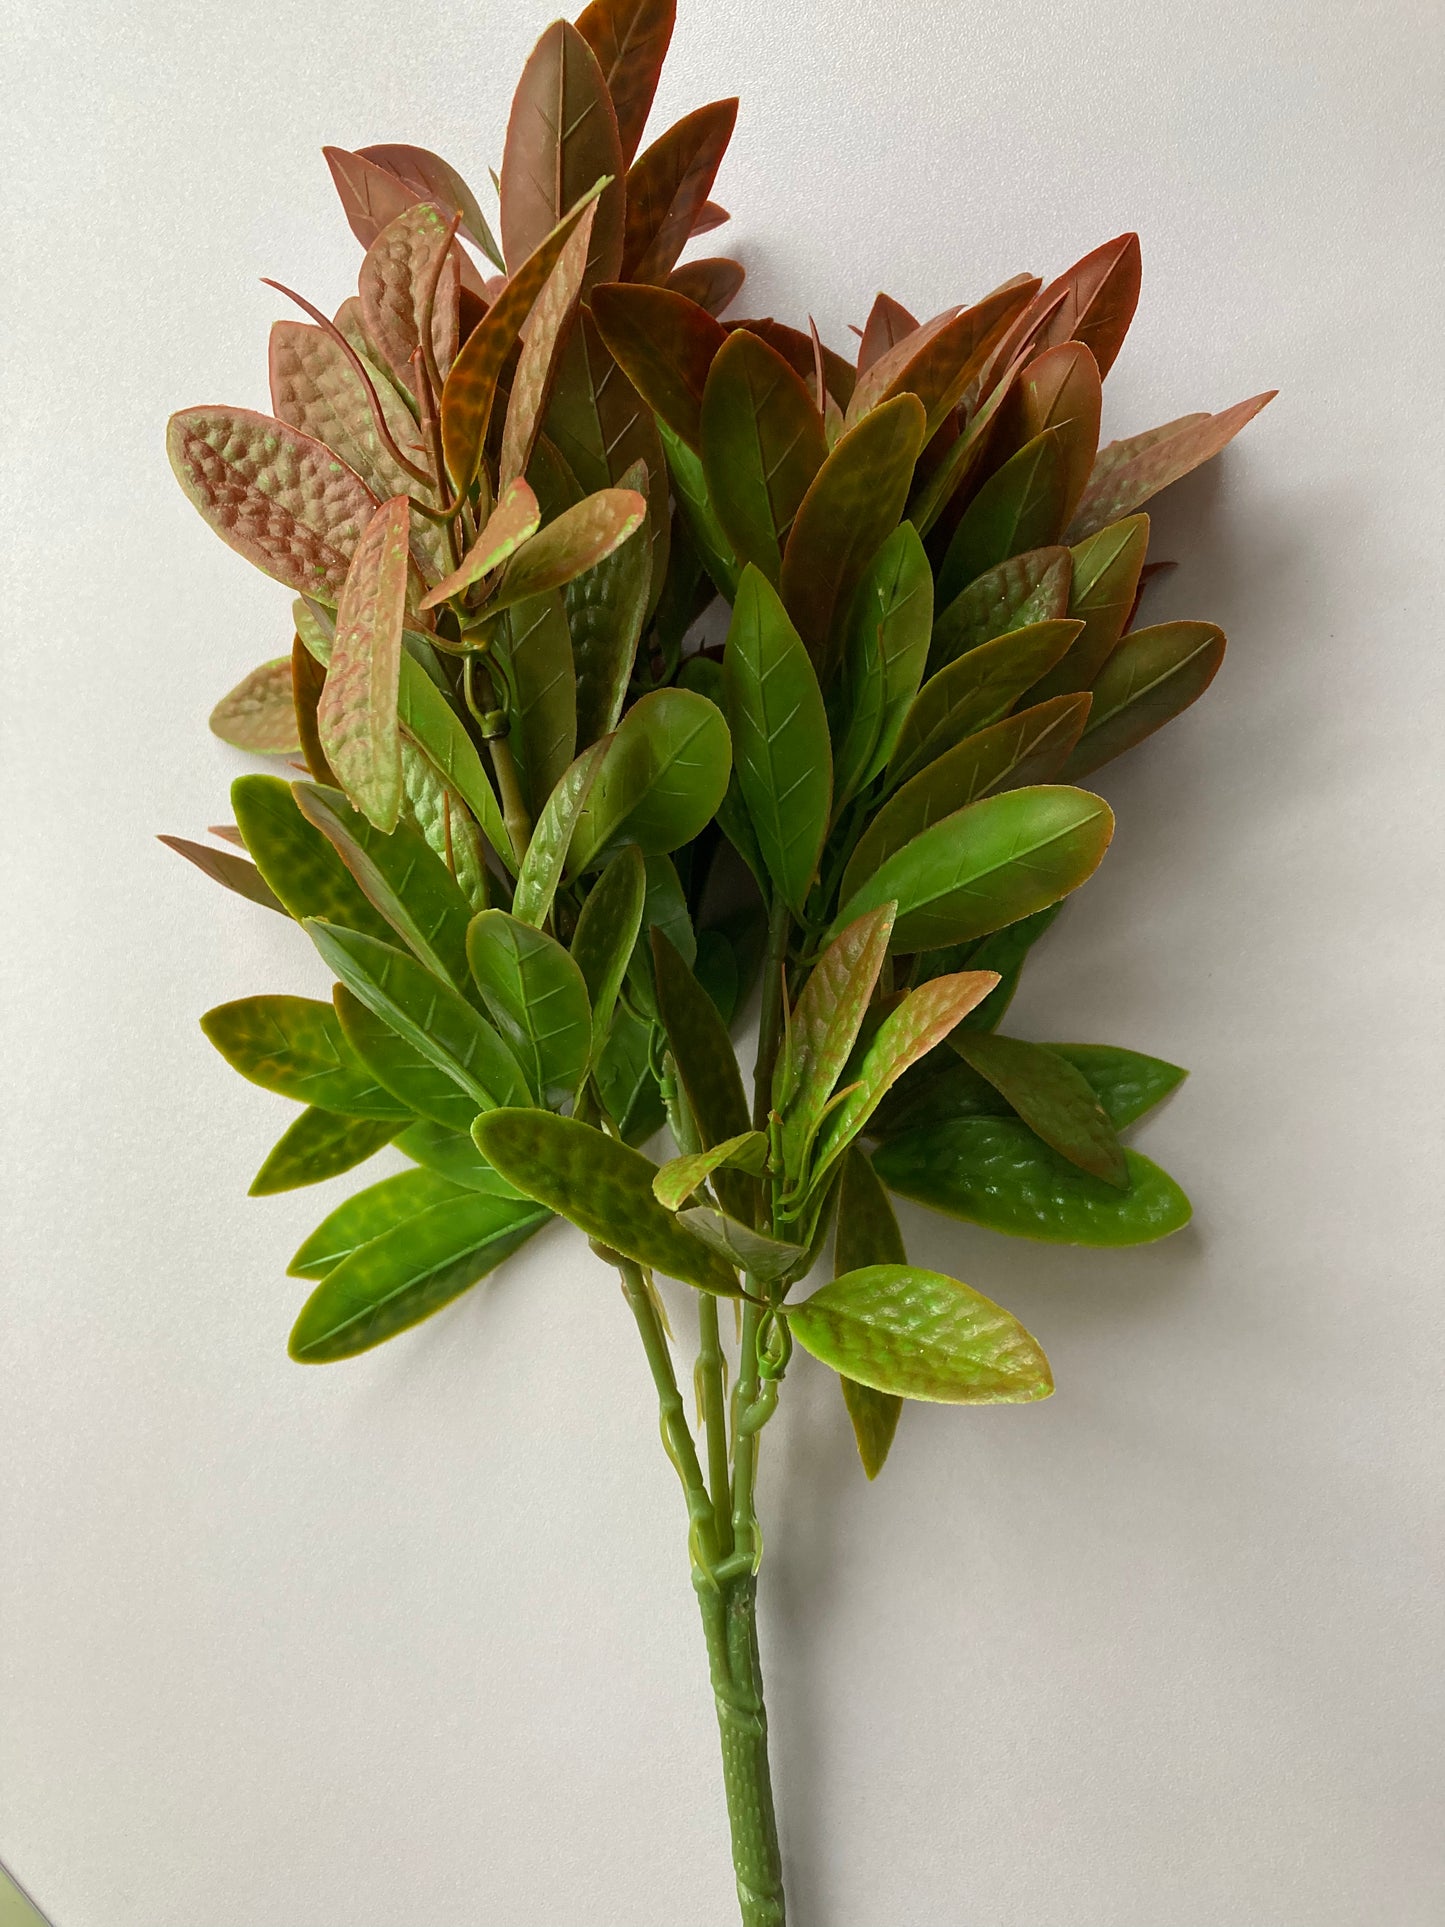 Brown/Green Mixed Leaf Bunch